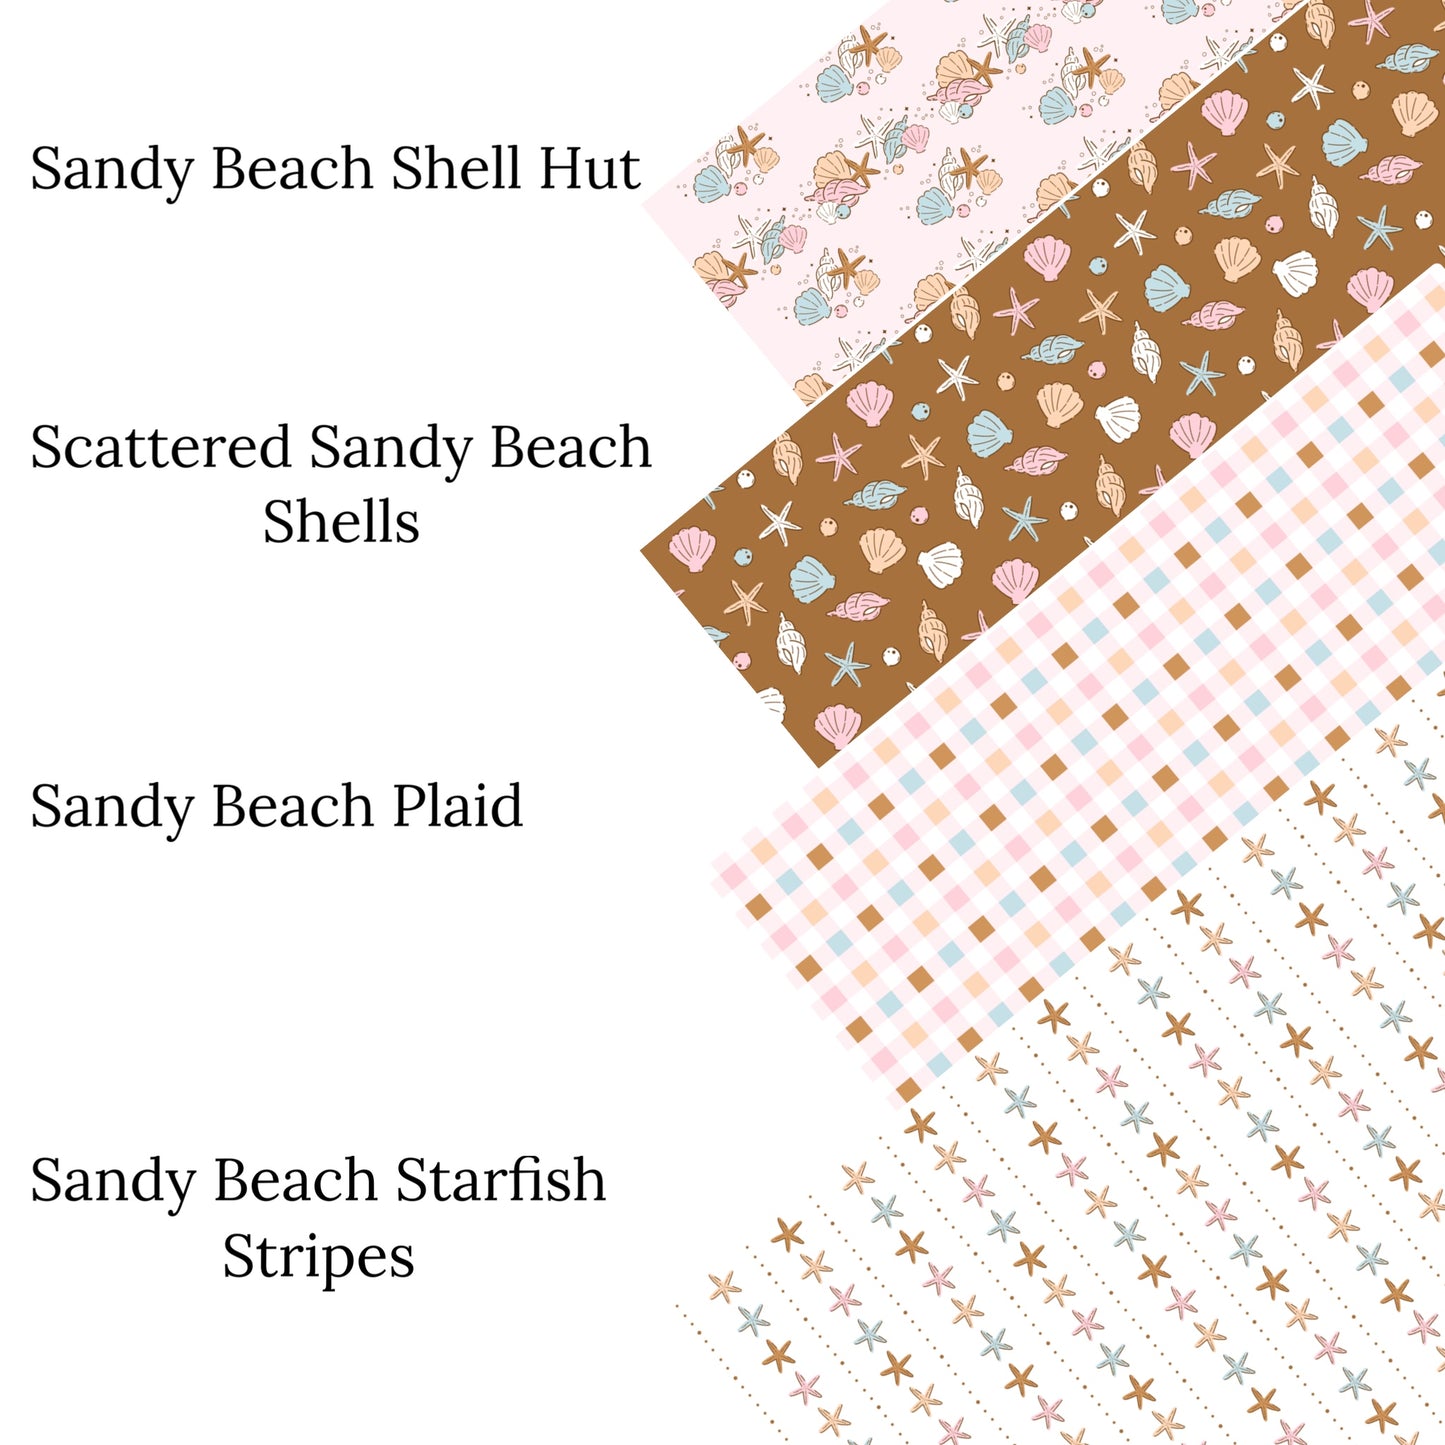 Sandy Beach Starfish Stripes Faux Leather Sheets